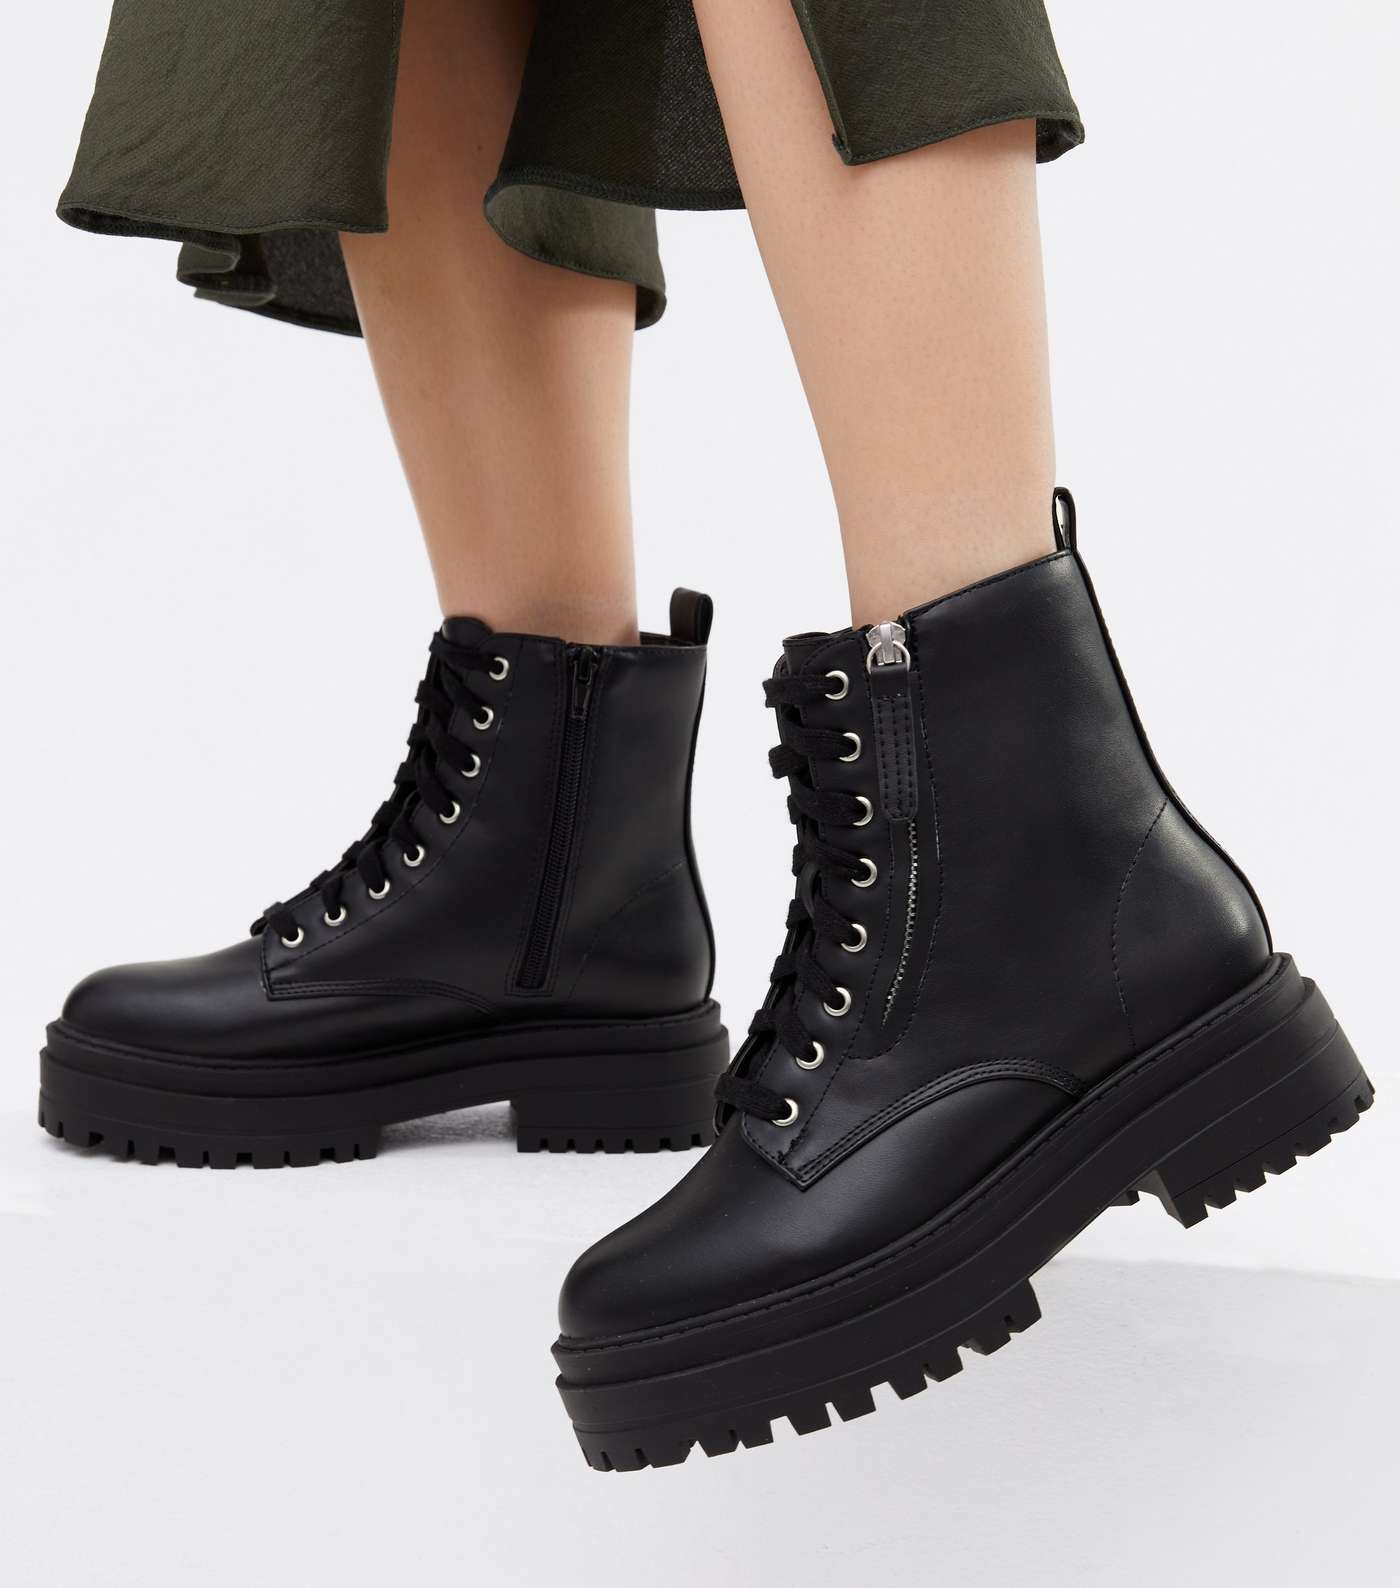 Black Leather-Look Zip Side Lace Up Chunky Boots Image 2